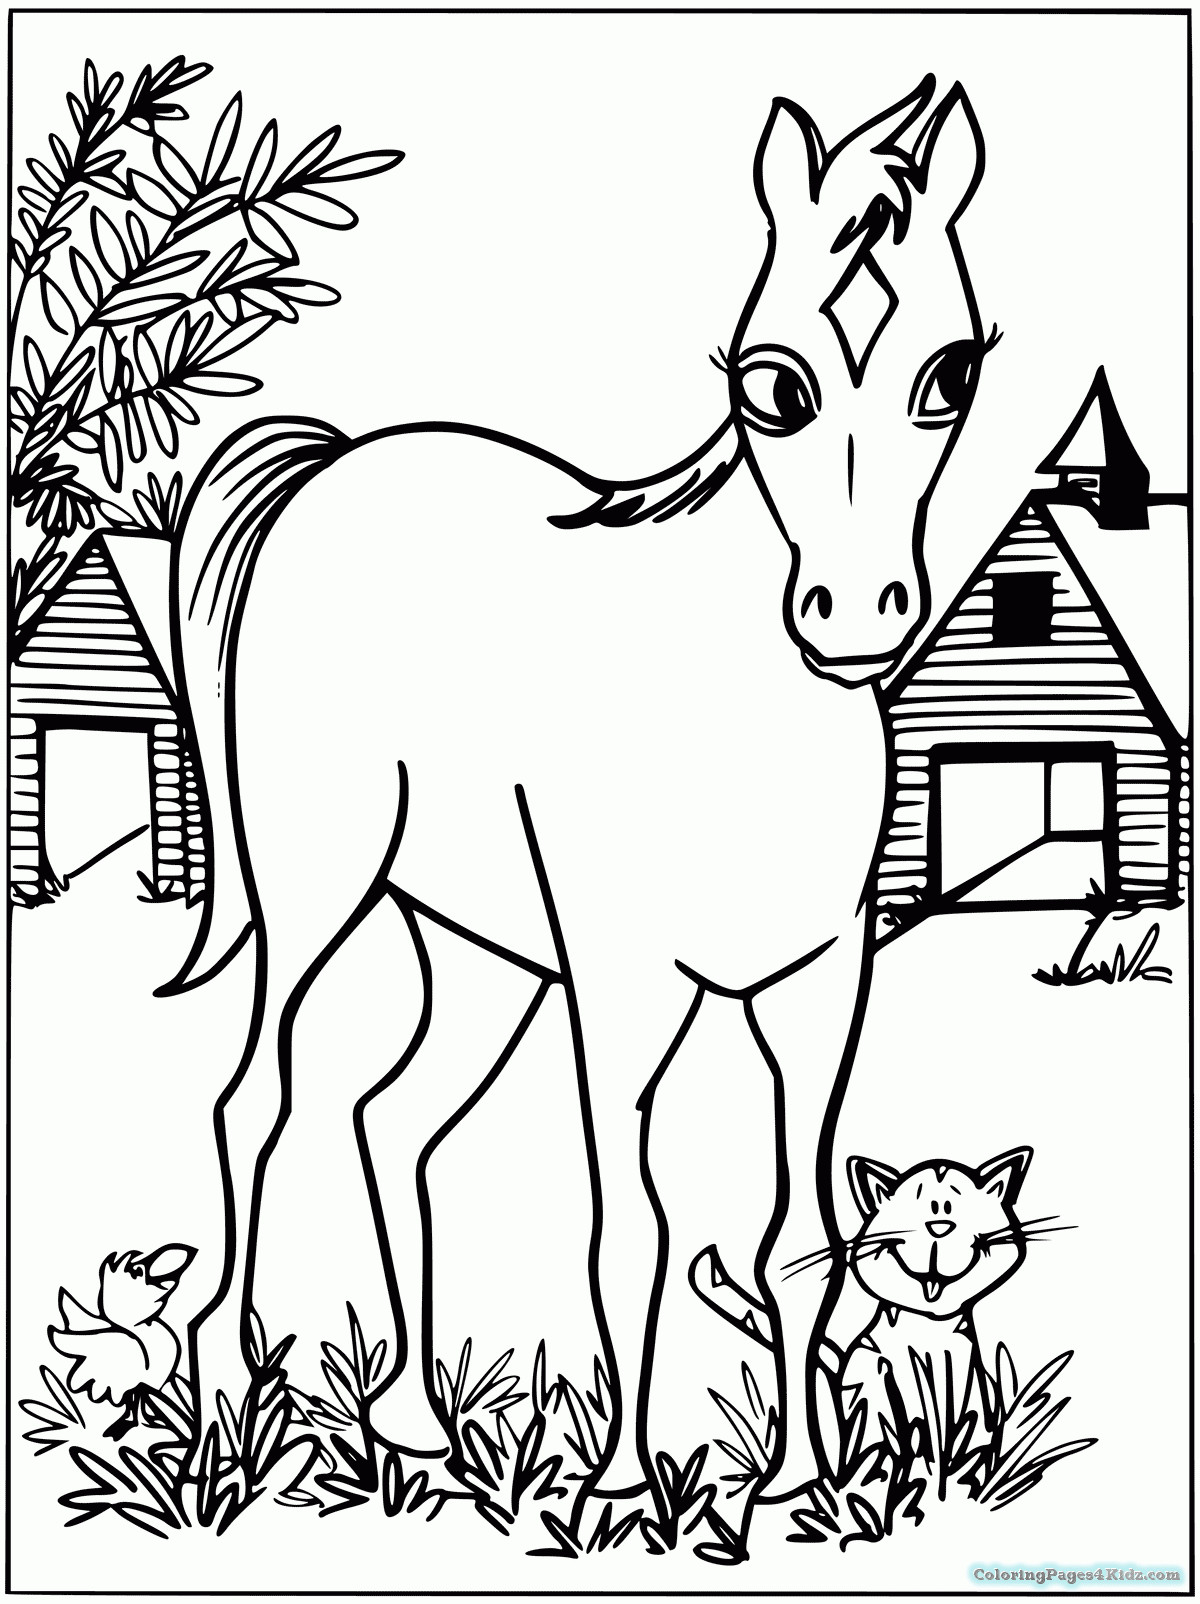 Baby Horse Coloring Pages
 Baby Horse Coloring Pages